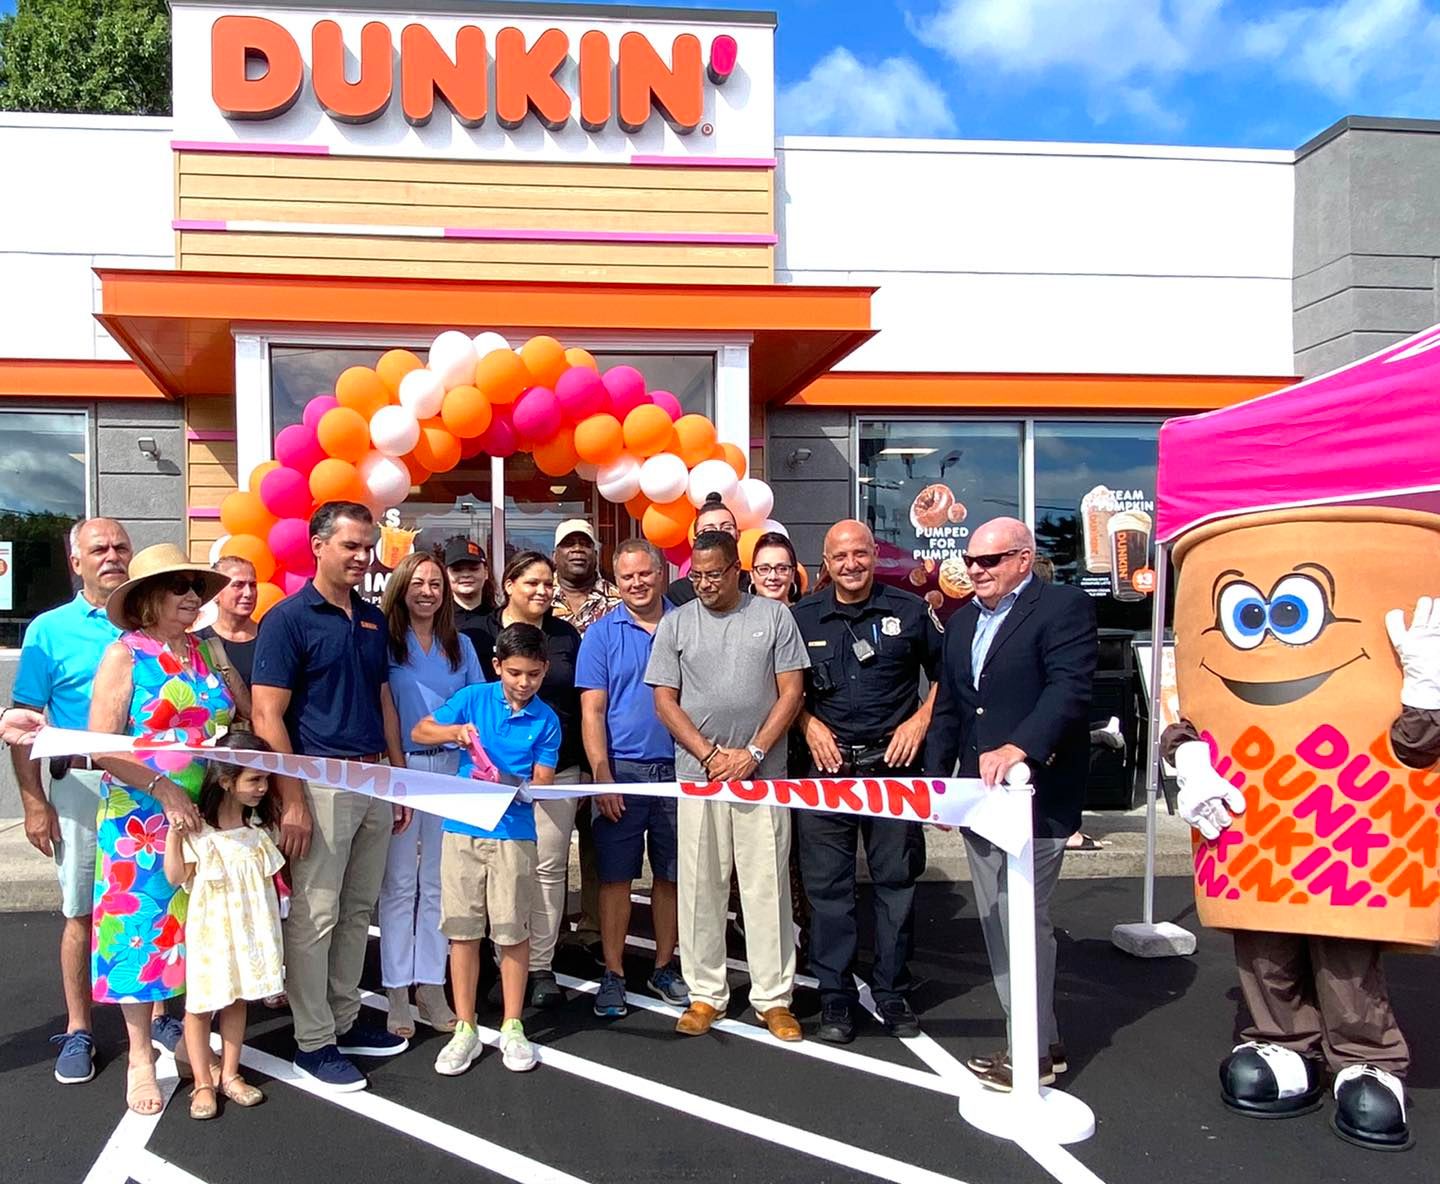 Recently, I joined members of the Waterbury State Delegation, plus local leaders from the Board of Alders and Board of Education at the grand opening and ribbon-cutting ceremony for the newly renovated Dunkin' on Watertown Avenue.